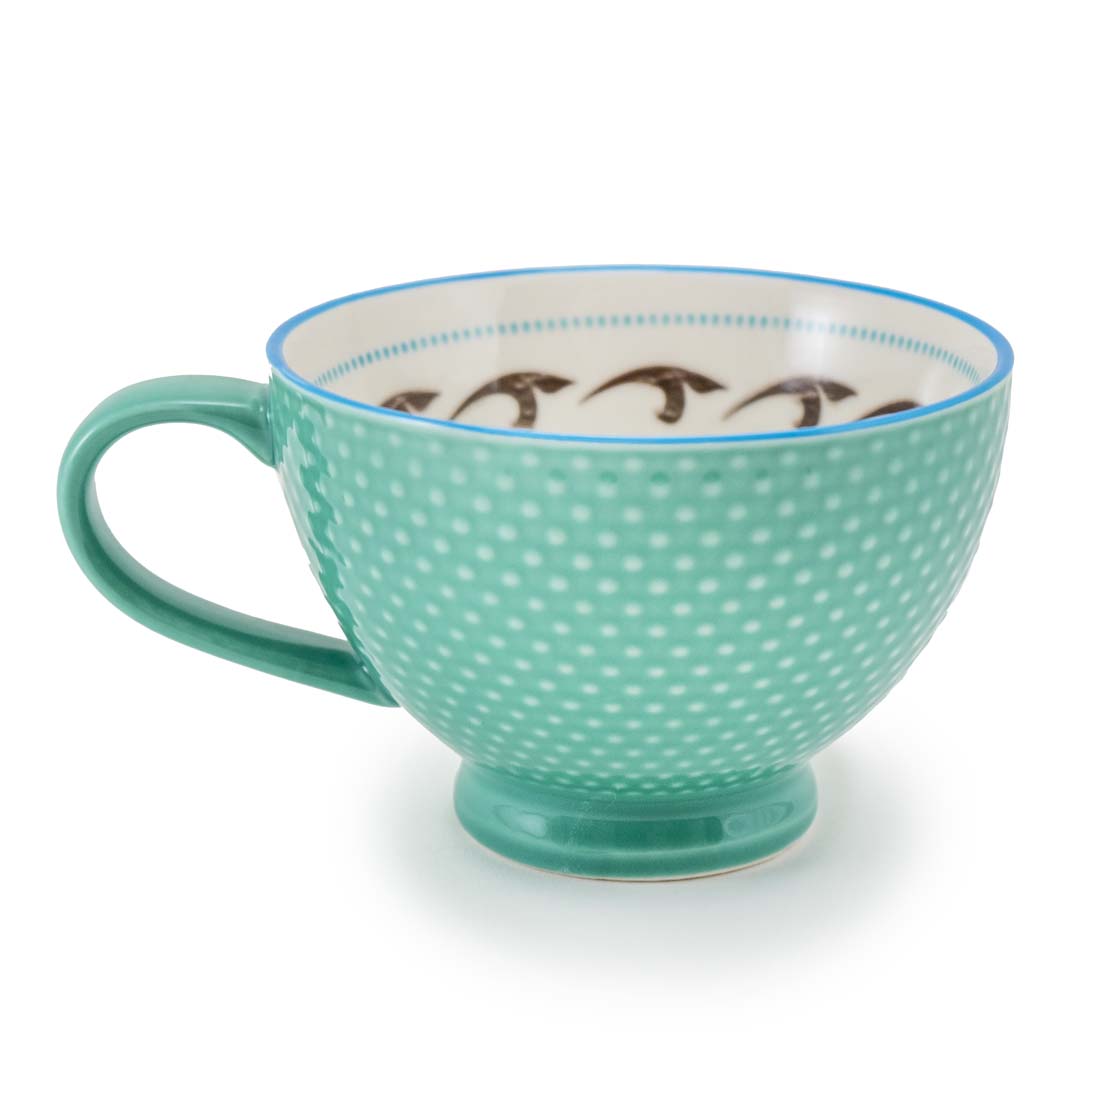 TEA CUP SET IN GLASS – THE WILD SHOWCASE